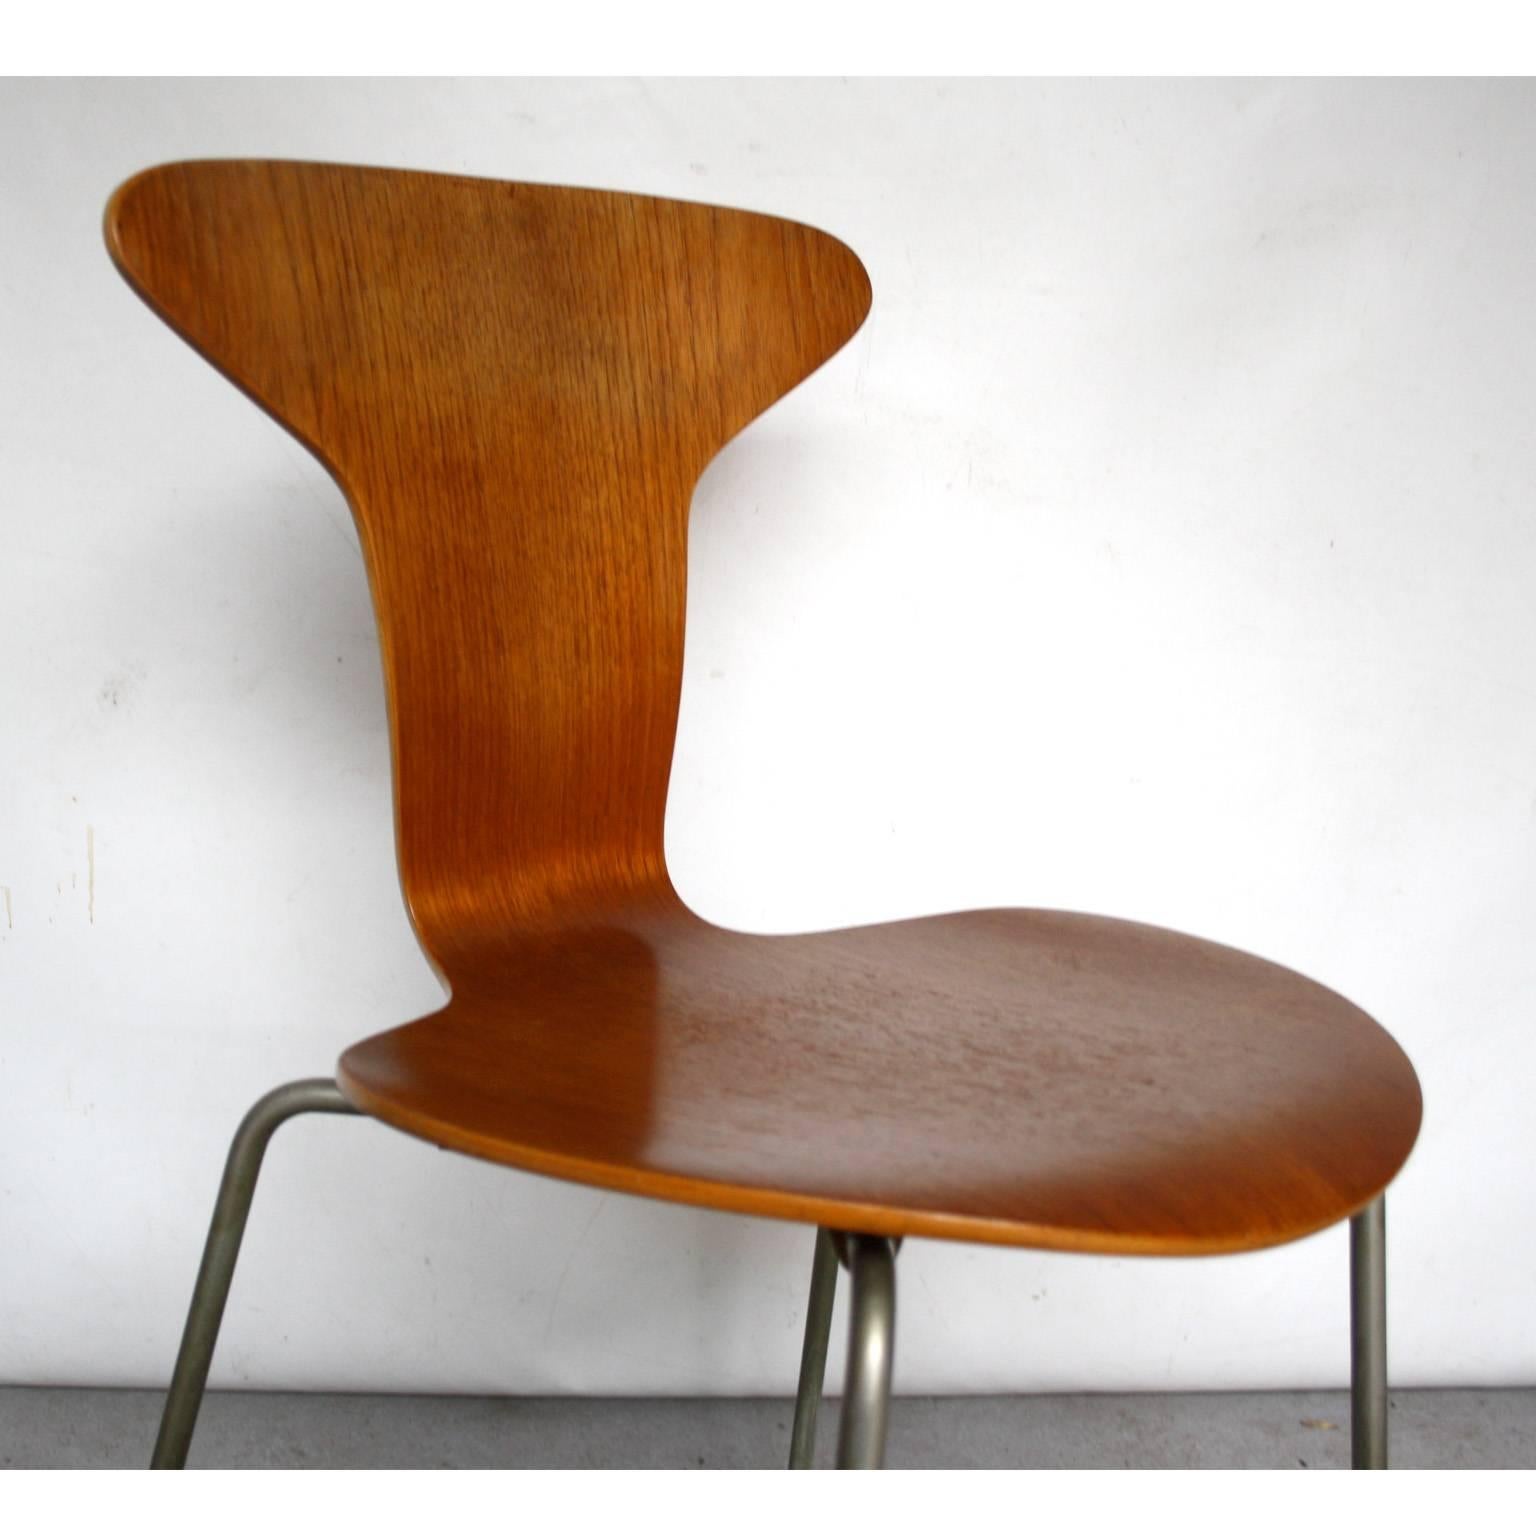 Mid-20th Century Arne Jacobsen for Fritz Hansen “Mosquito” Dining Chair For Sale